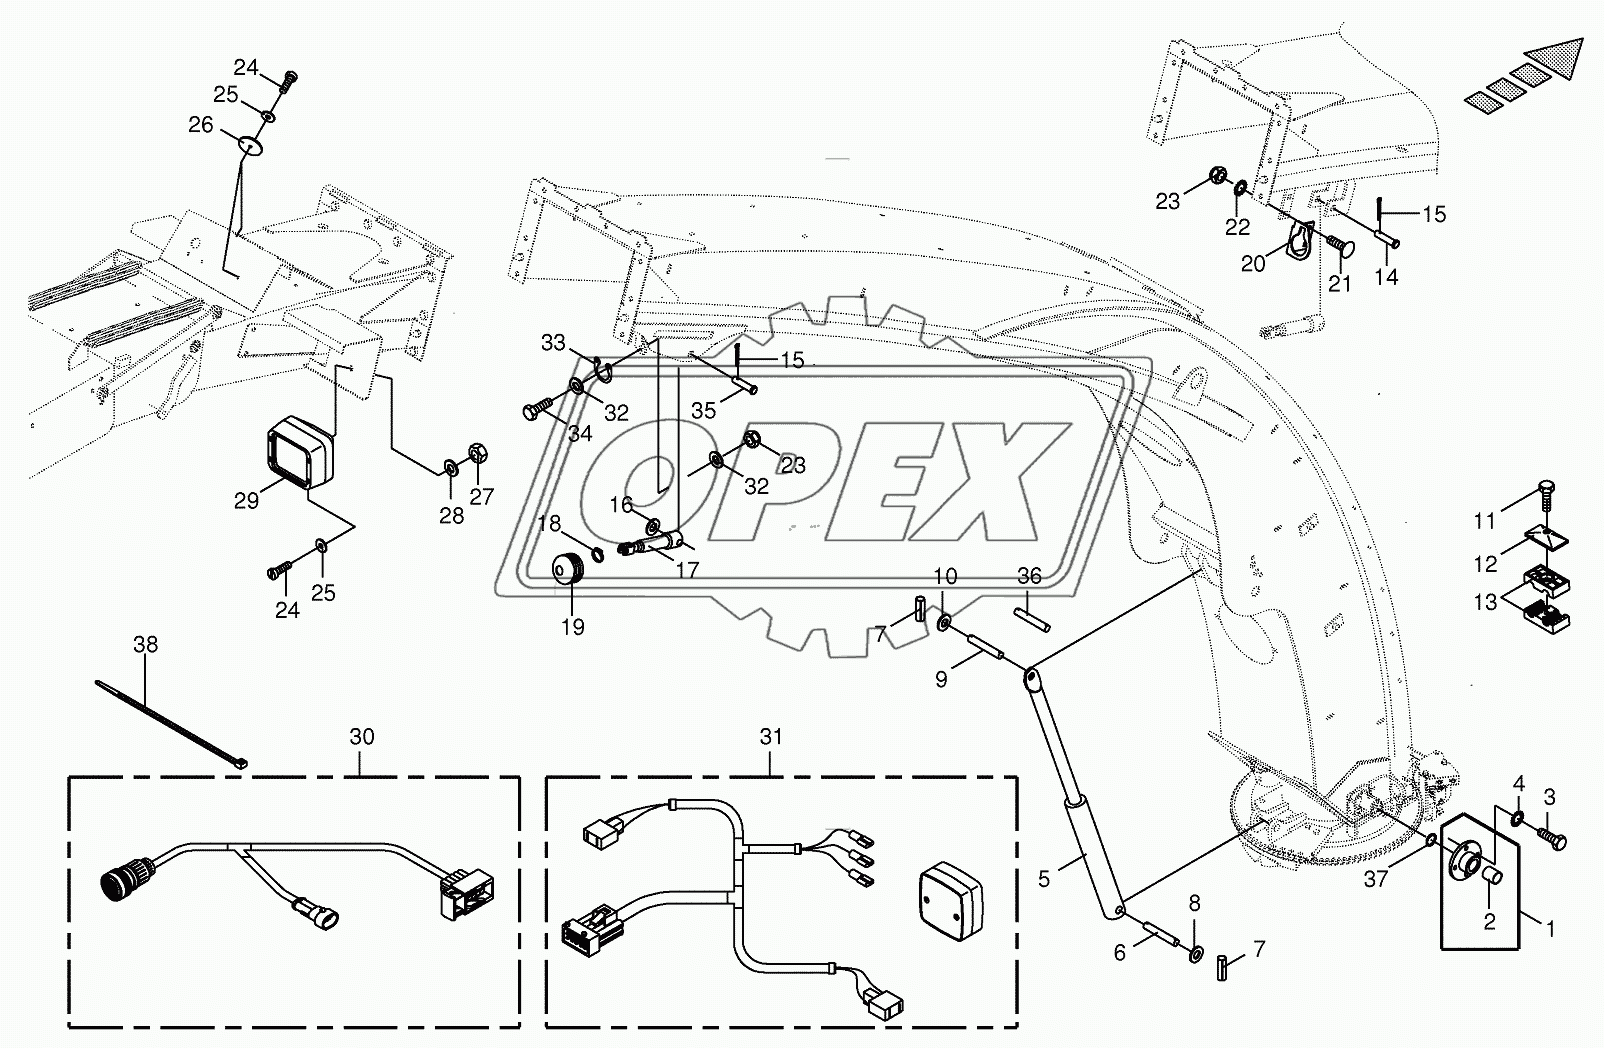 Upper discharge chute - mounting parts